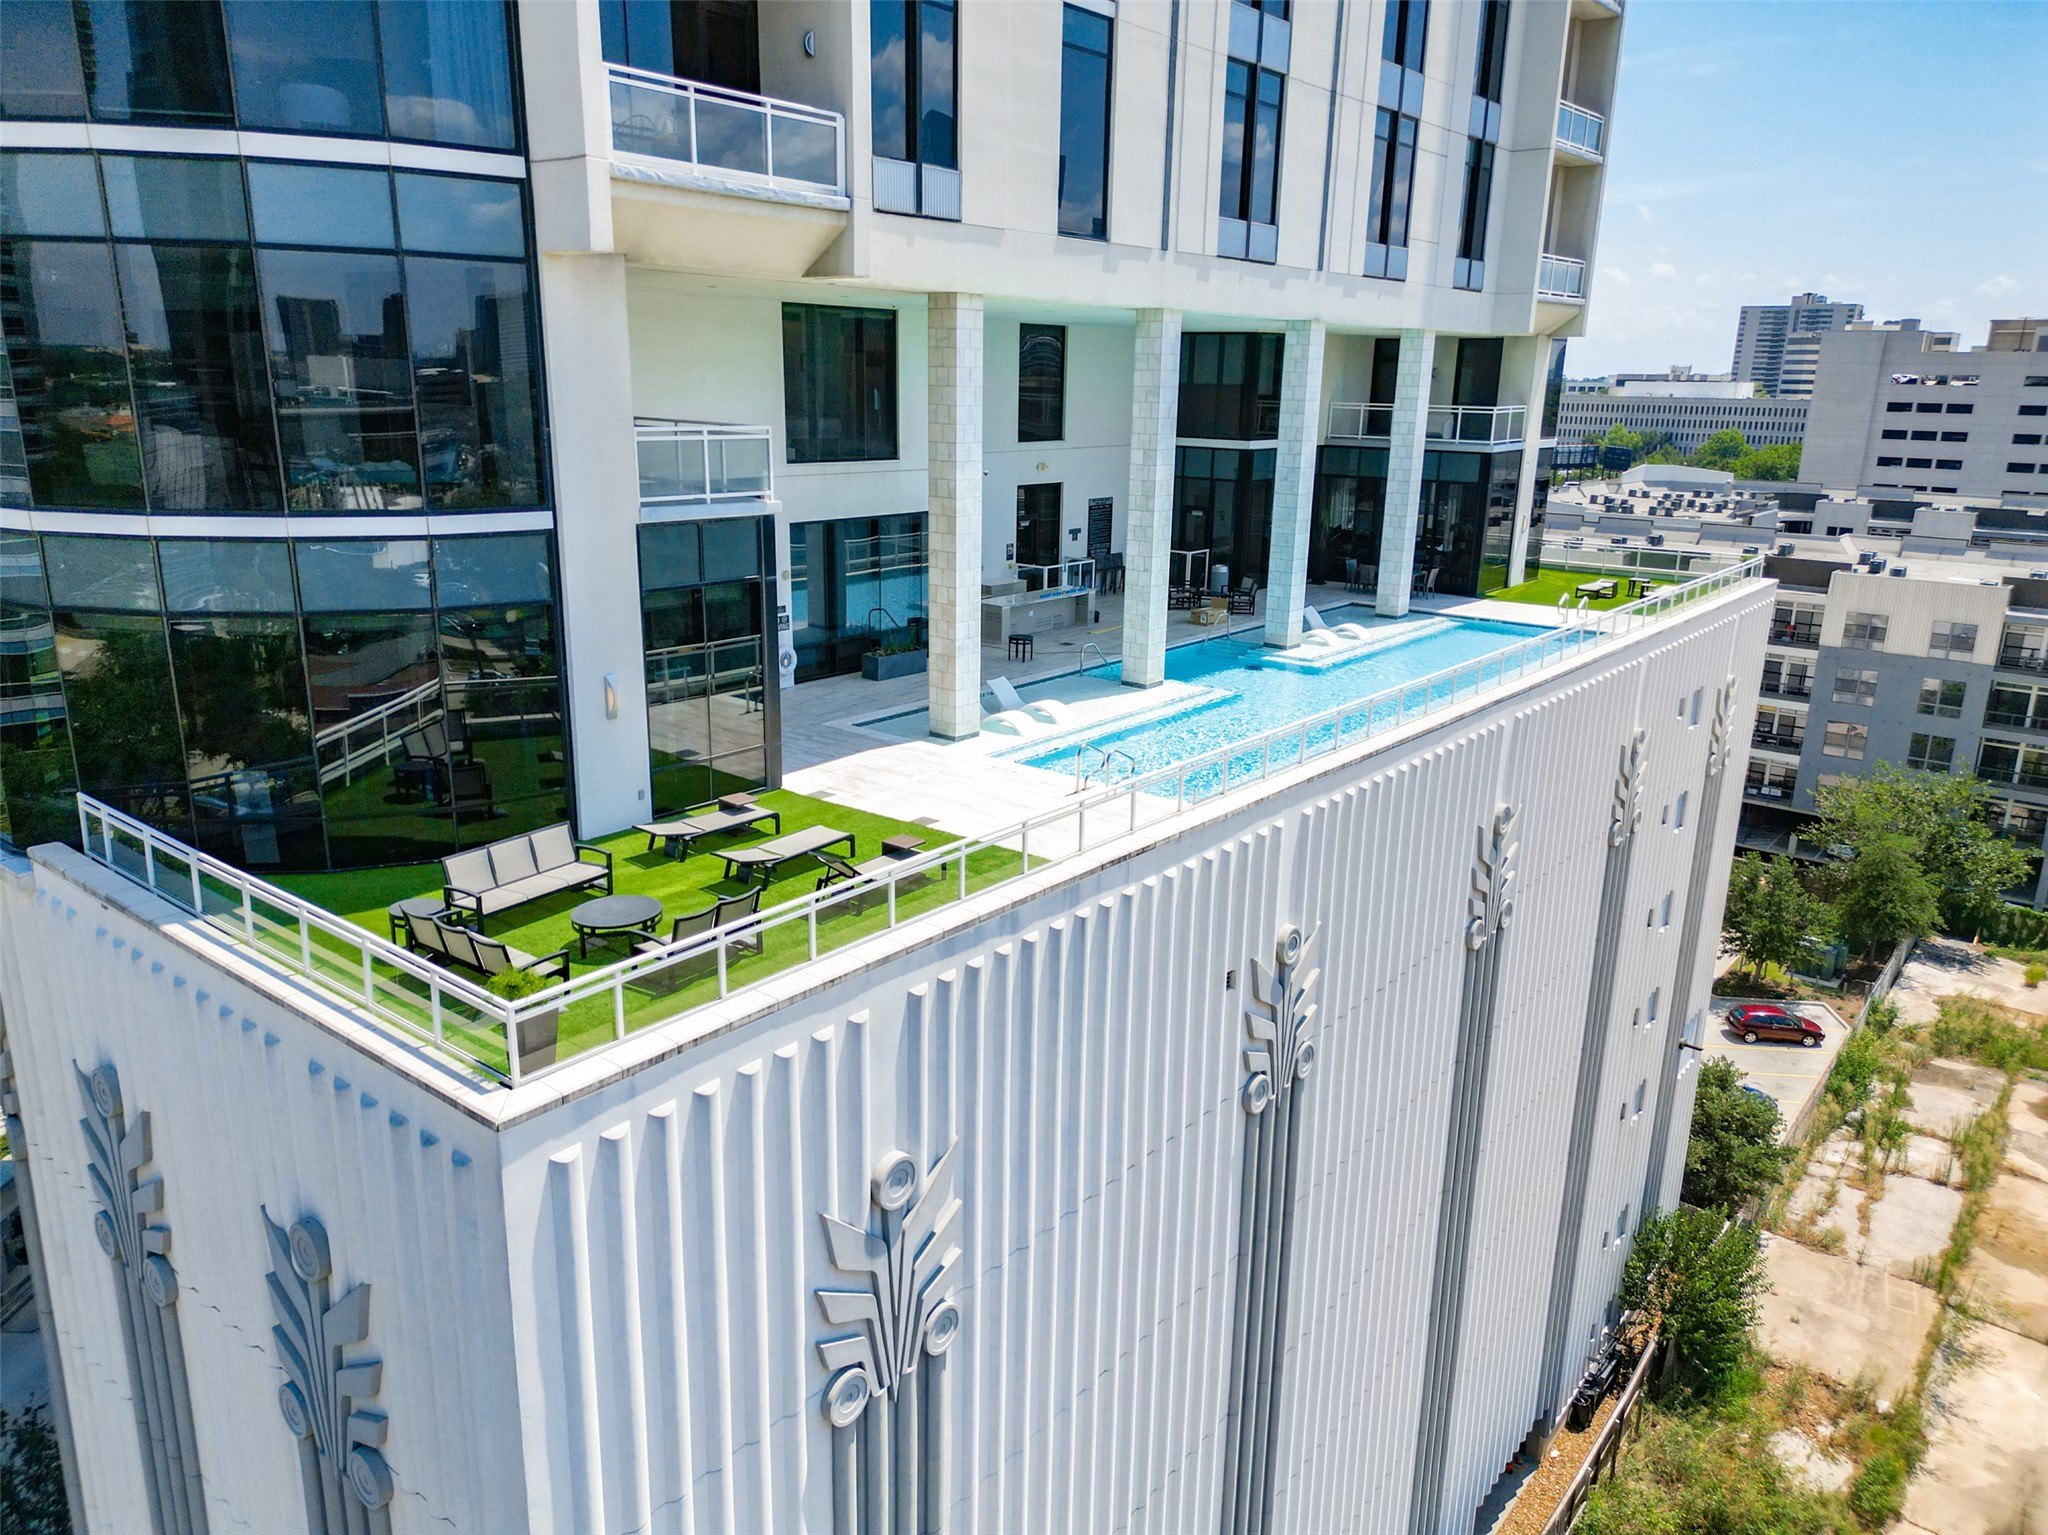 Enjoy laying out in the sun overlooking Downtown Houston!